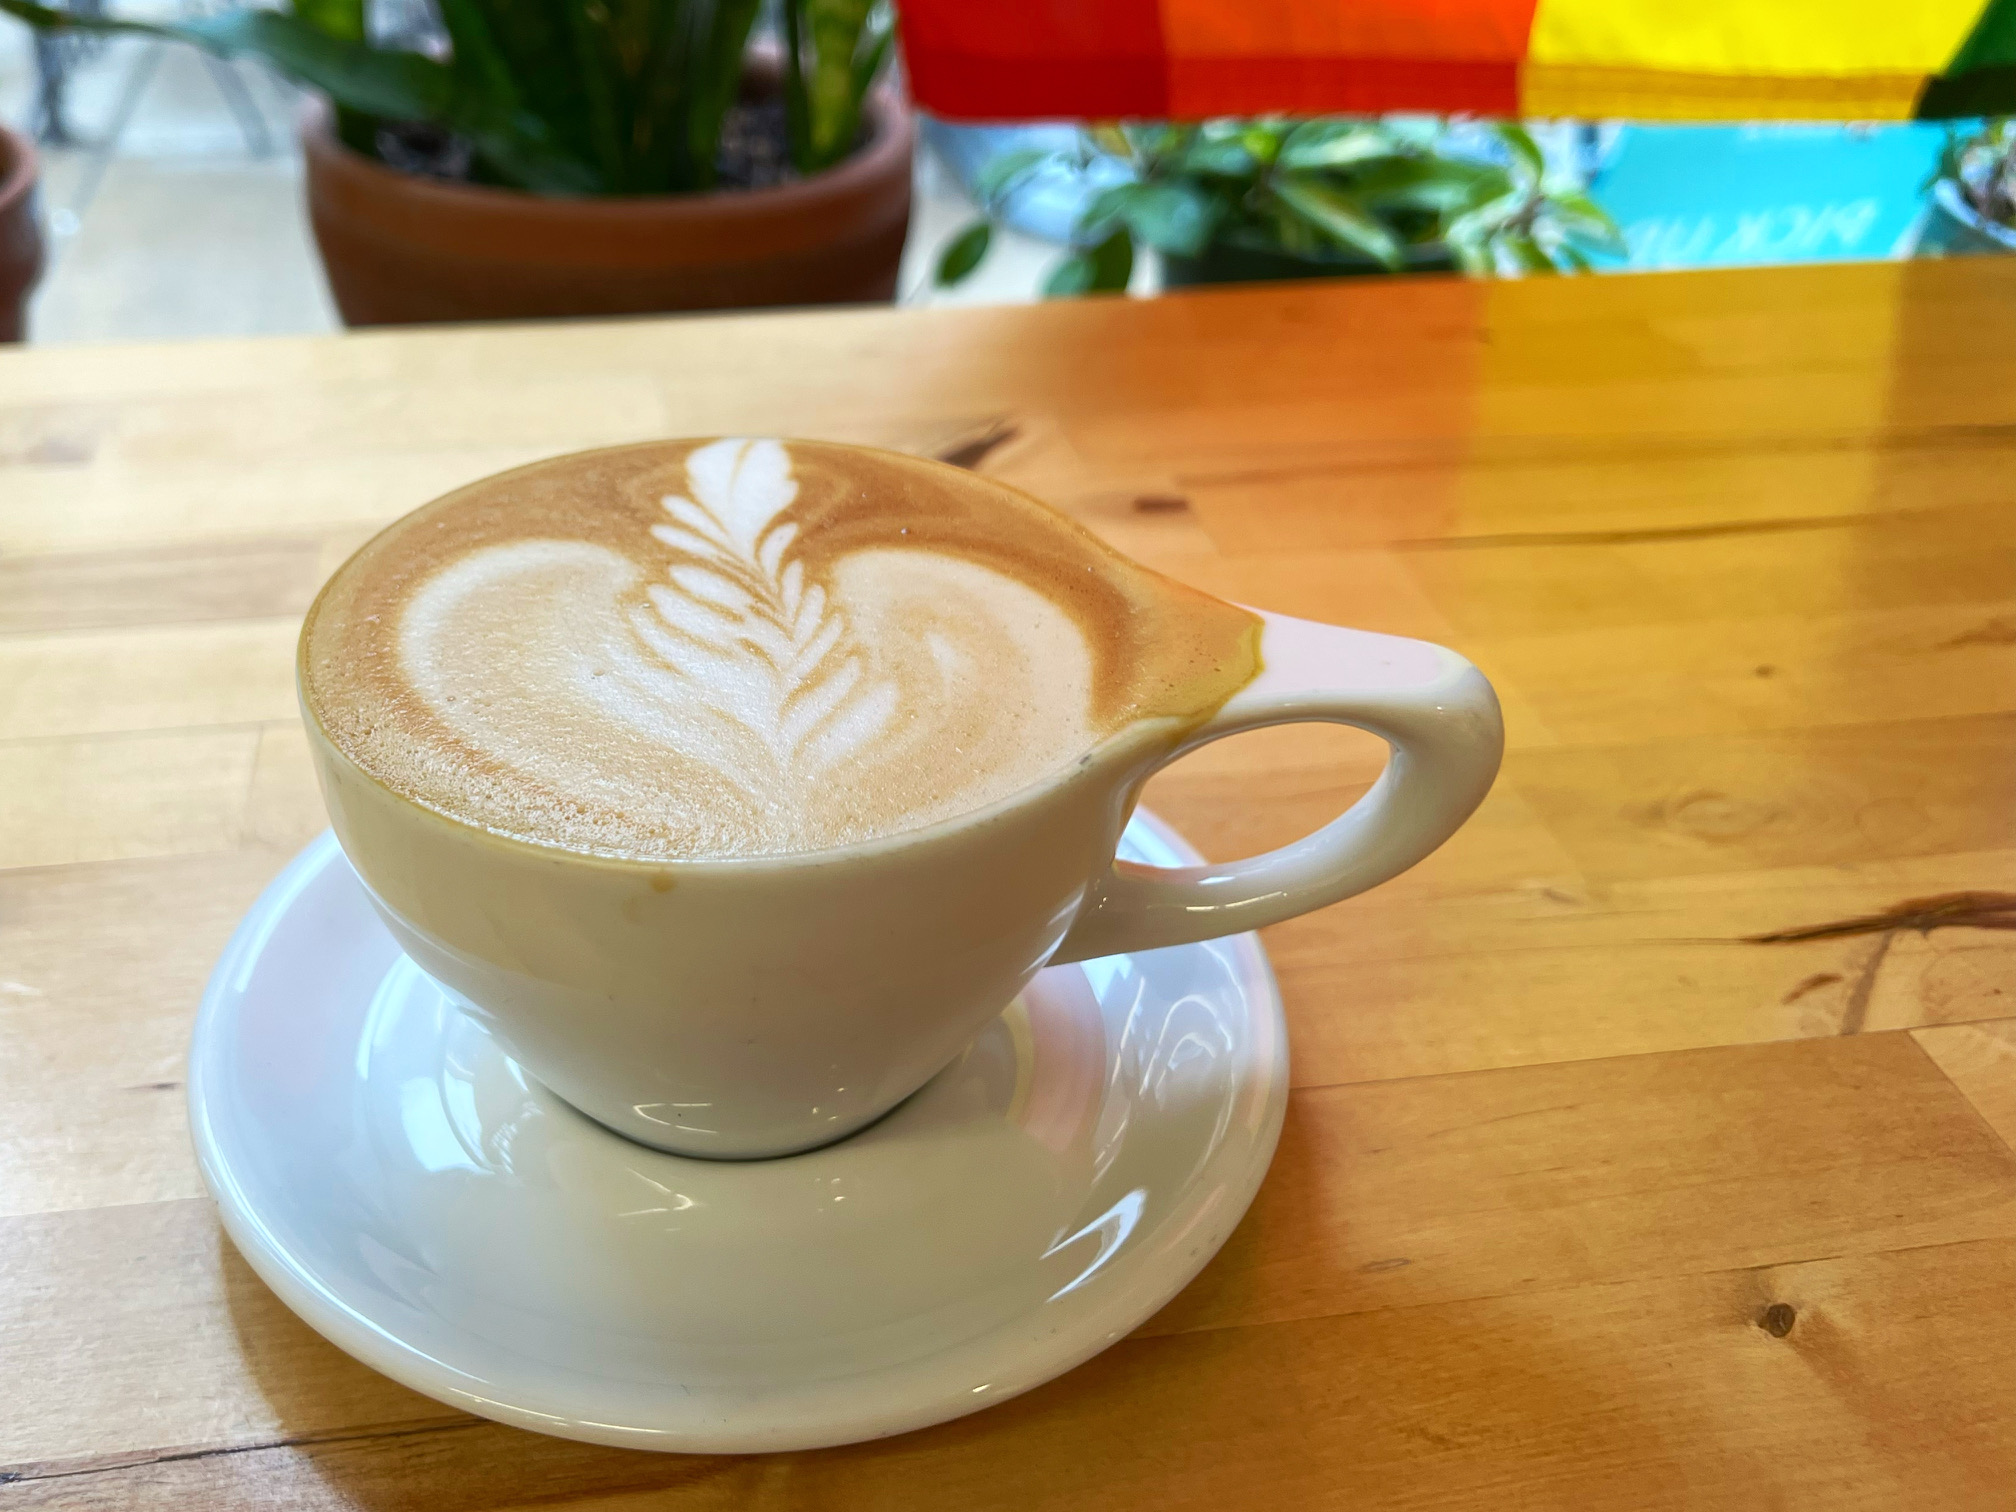 On a light wooden counter, there is a white coffee cup with a white saucer beneath it. The latte has an artfully made latte art on top. Photo by Alyssa Buckley.